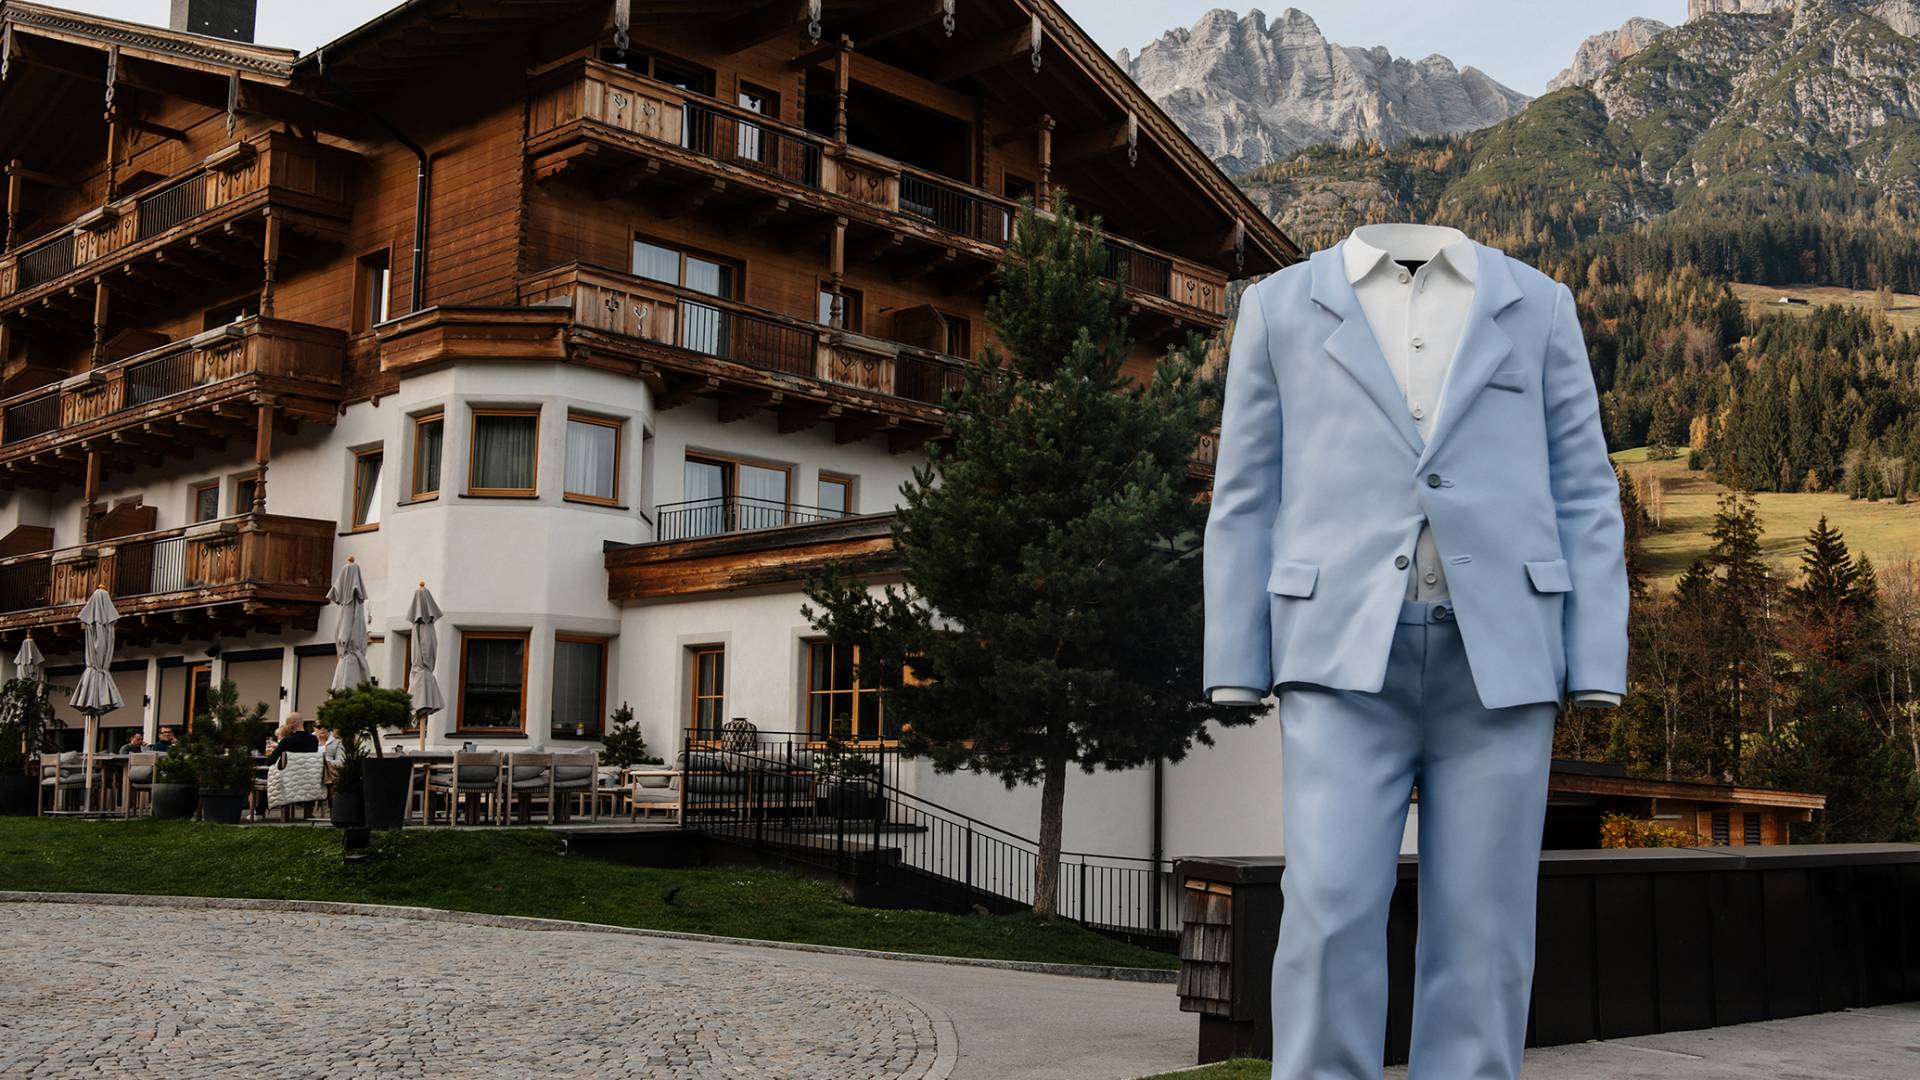 the artwork Big Suit created 2010/2016 by Erwin Wurm at the Naturhotel Forsthofgut